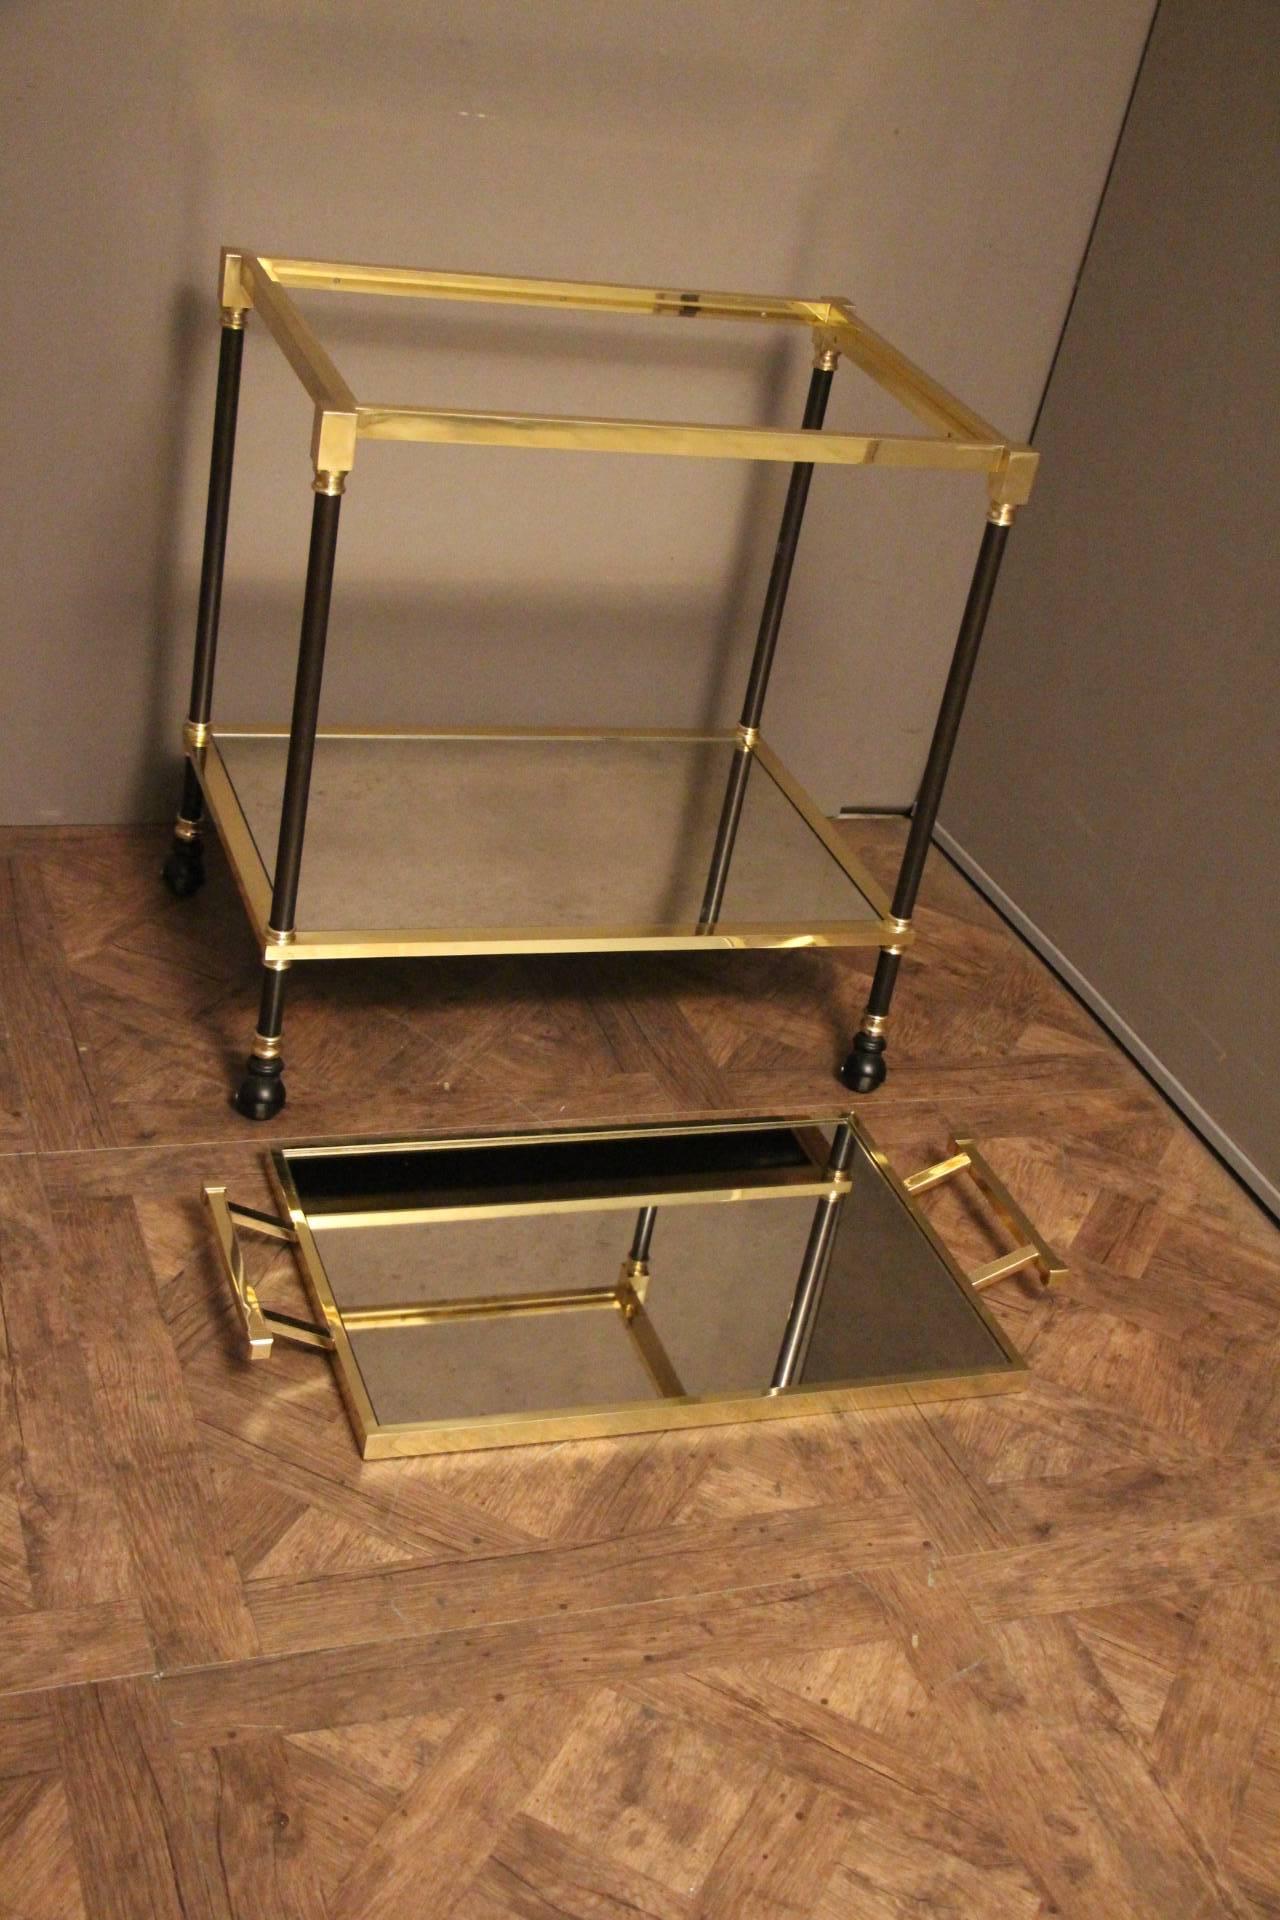 This very elegant and sturdy rolling bar trolley features two framed levels in mirror. The upper framed brass tray with its two side handles is removable.
It is particularly elegant thanks to it is black steel and golden brass legs and its shape is